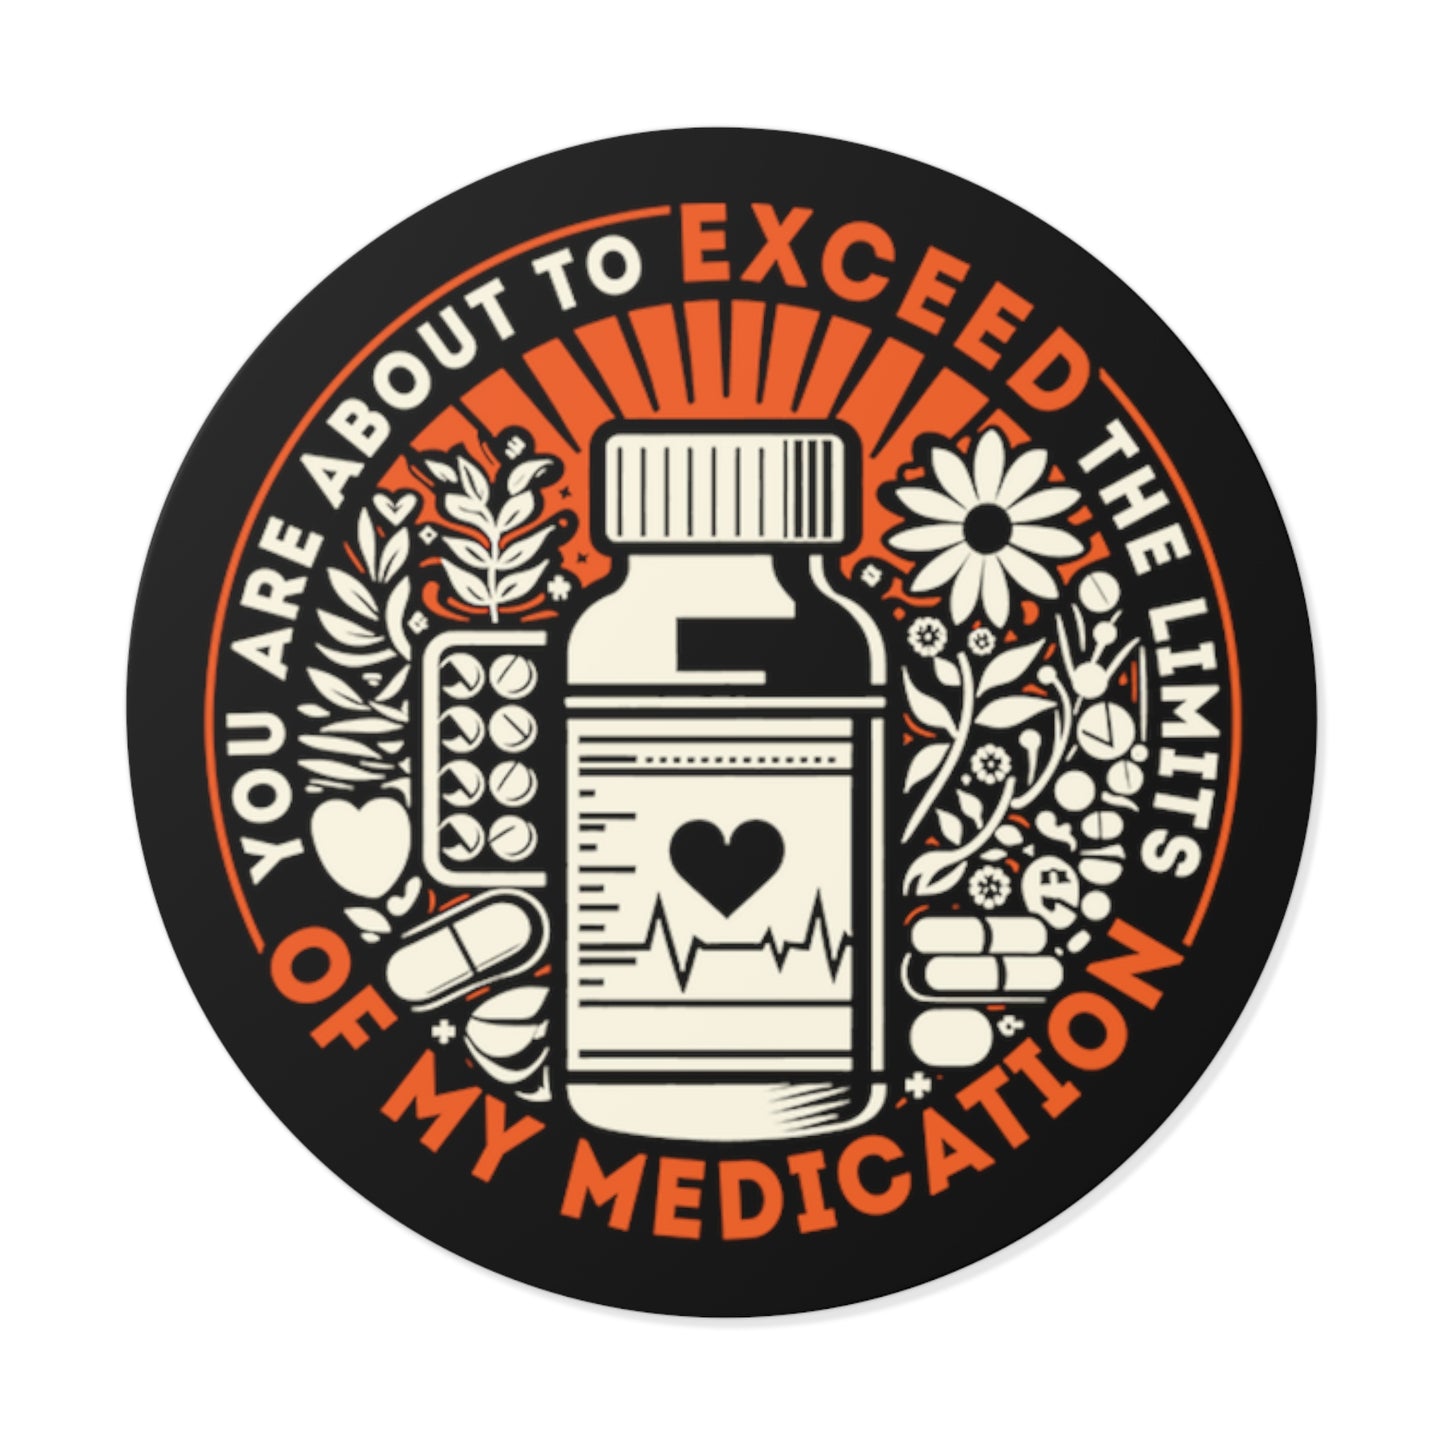 You are about to Exceed the Limits of my Medication 02 Sticker